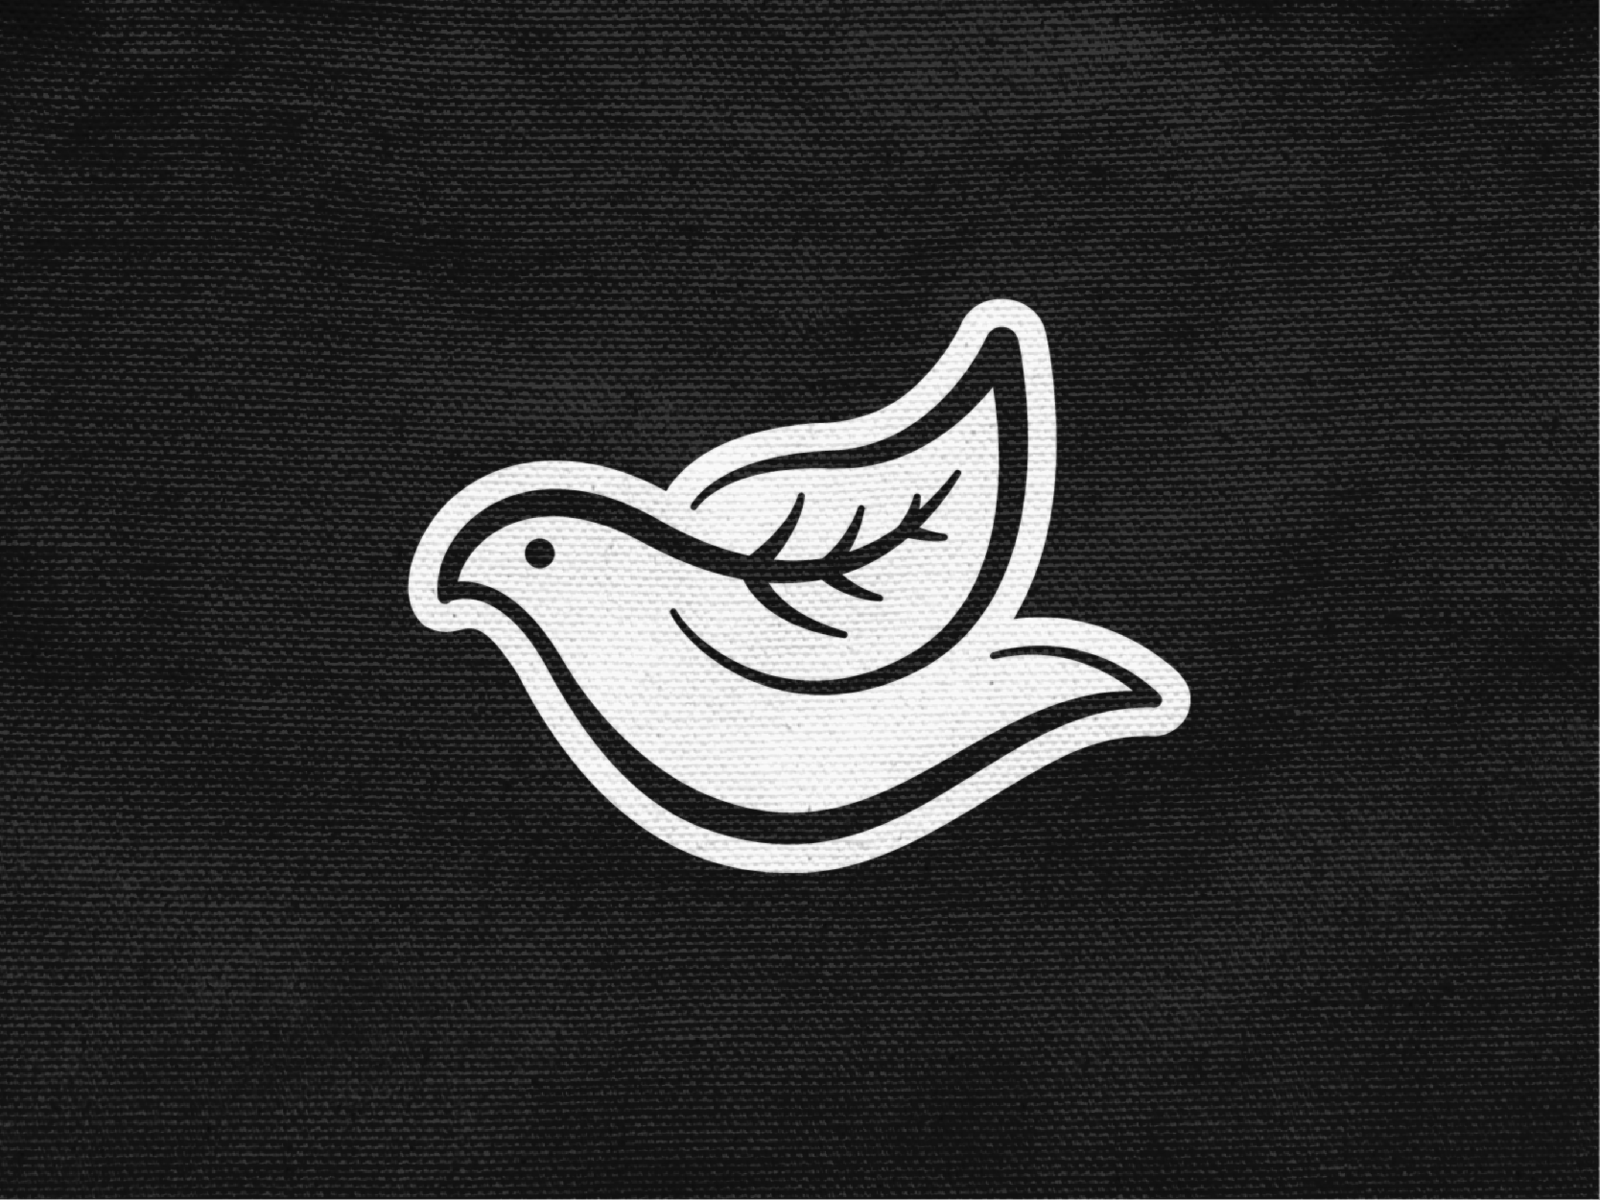 Bird leaf! by Nour on Dribbble